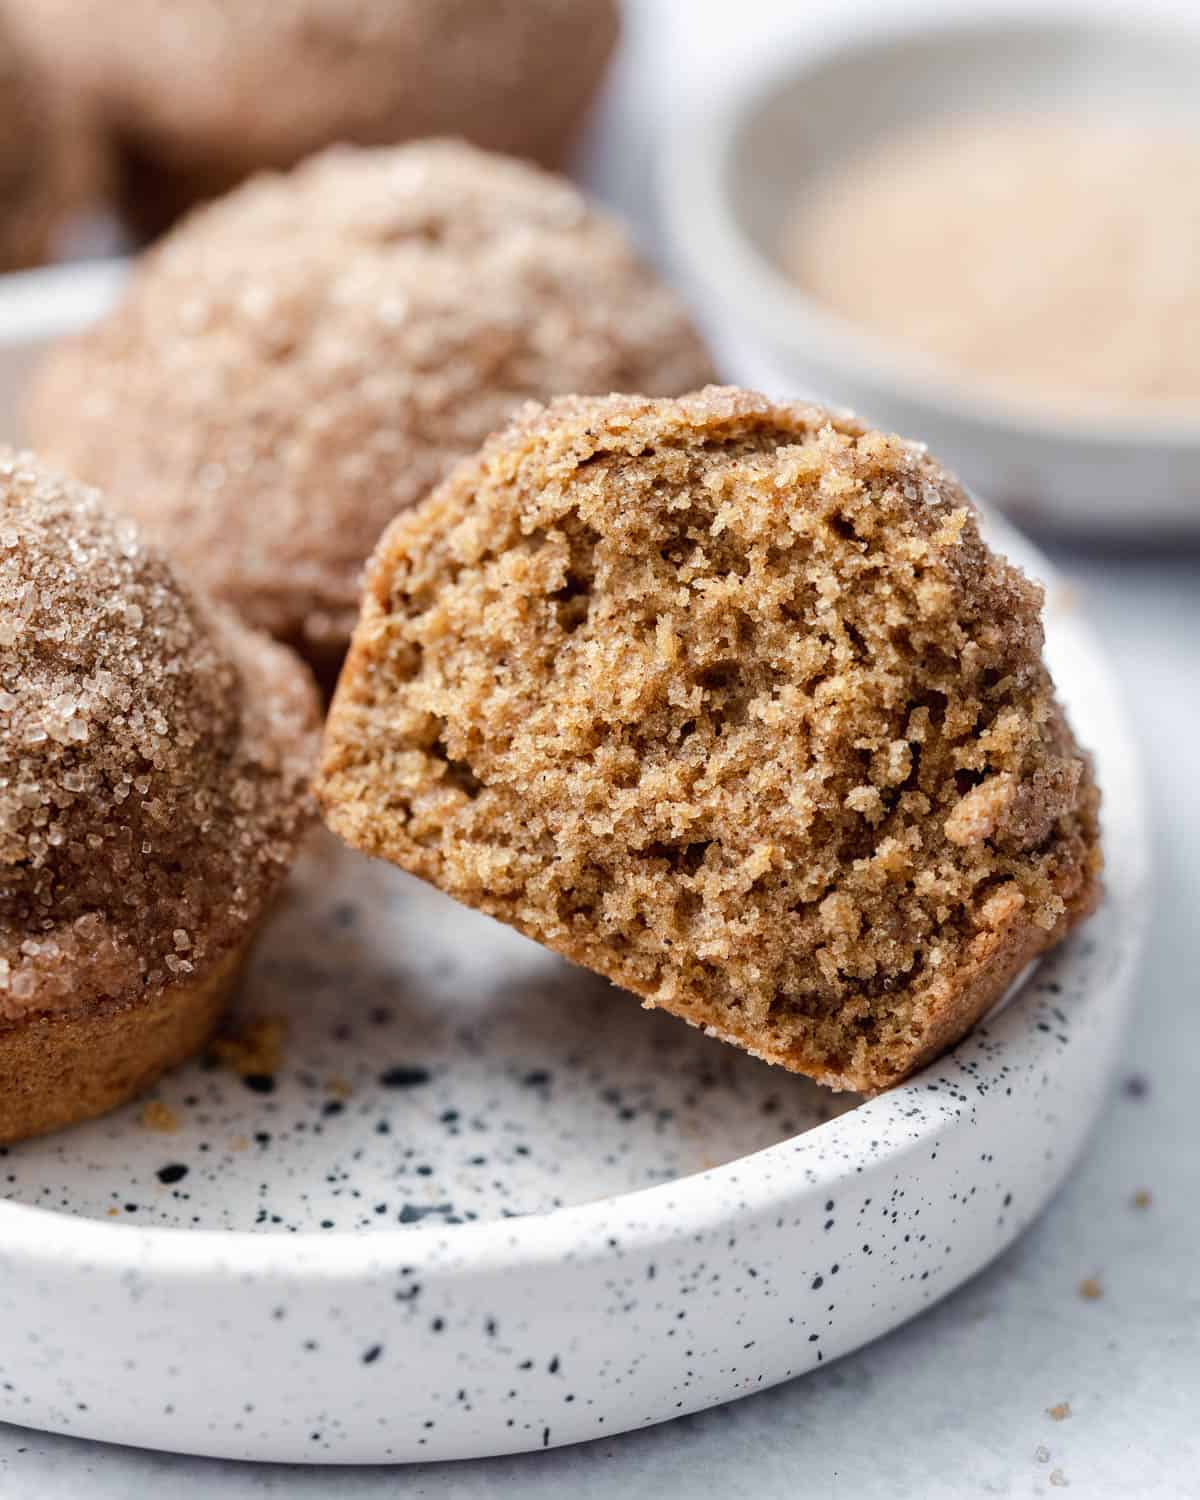 Muffin with a cinnamon sugar topping cut in half on a white plate.